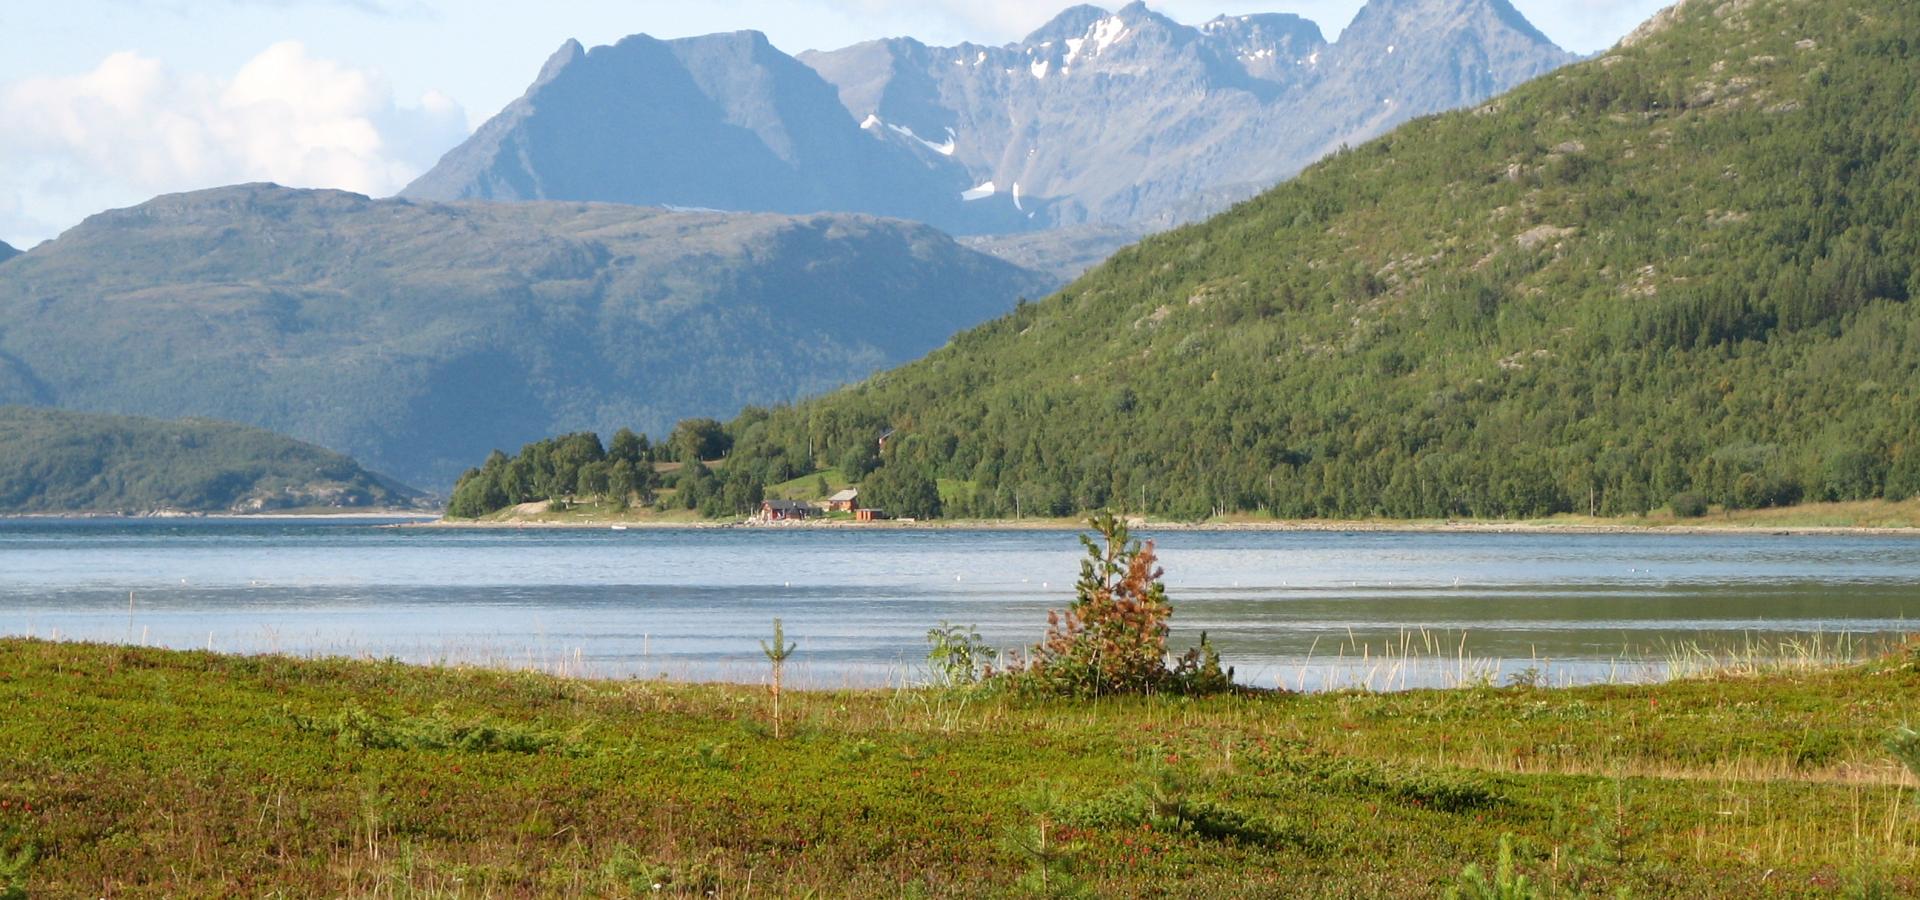 Flat green landscape, the fjord and mountains in the background